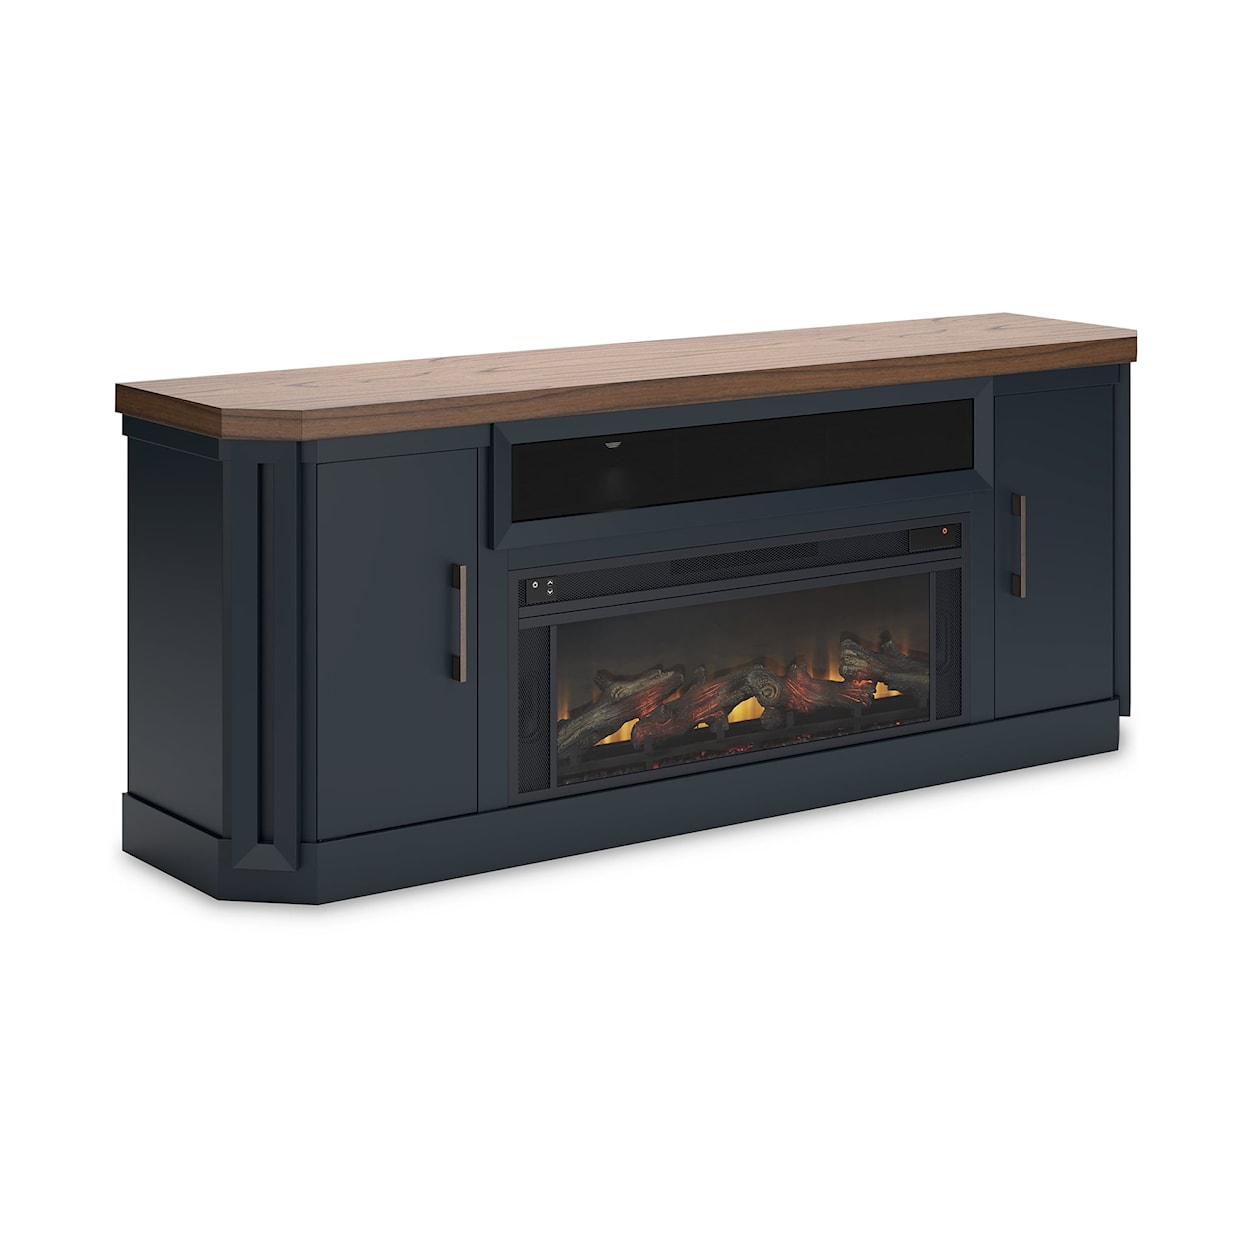 Ashley Furniture Signature Design Landocken 83" TV Stand with Electric Fireplace